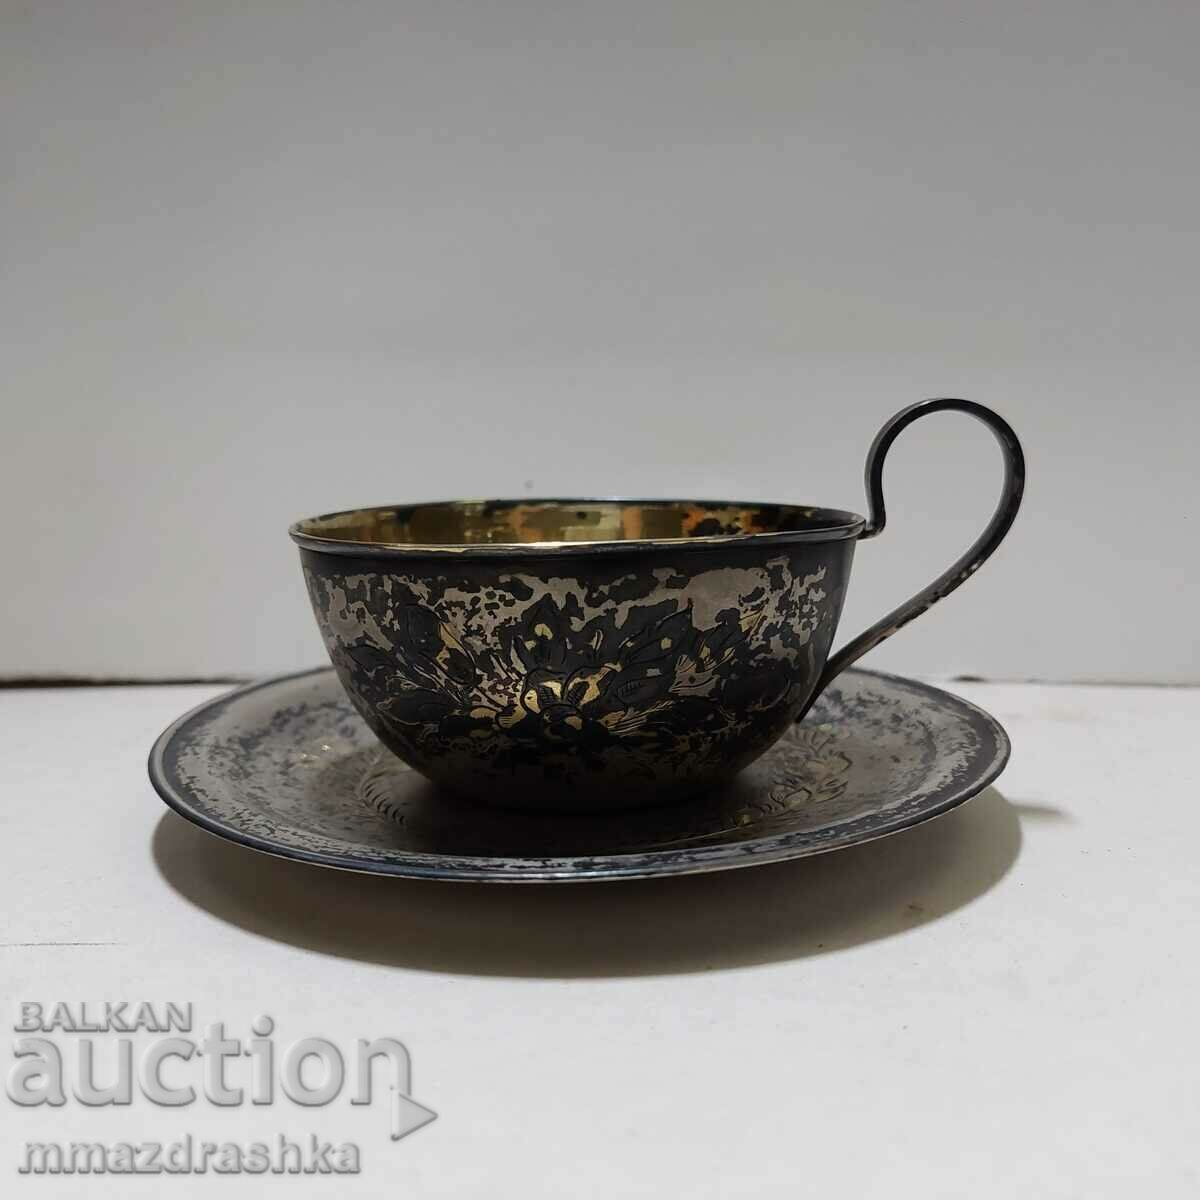 Silver tea cup and saucer